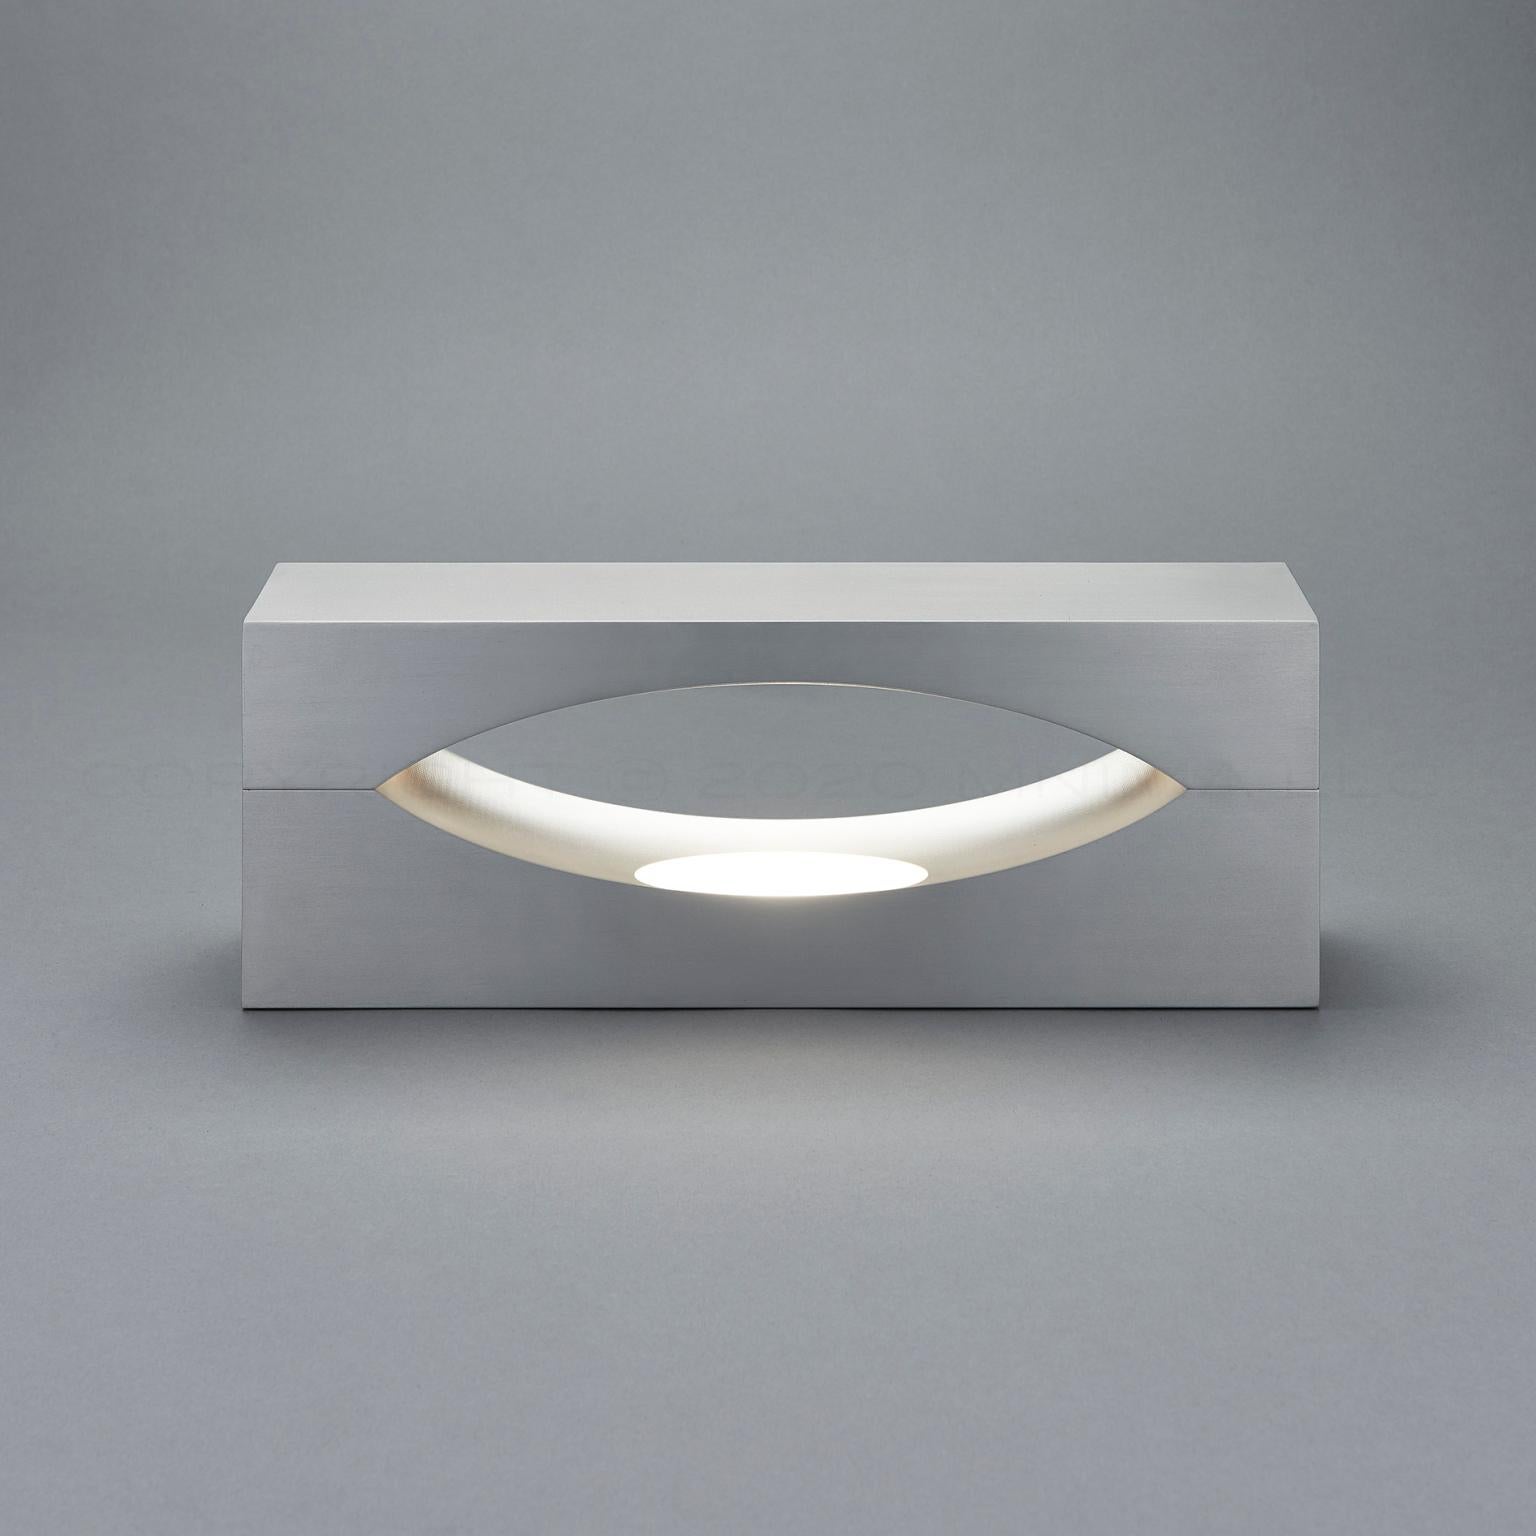 American Snakke by mnima, Table Light Sculpted from Solid Aluminum, Modern, Minimal